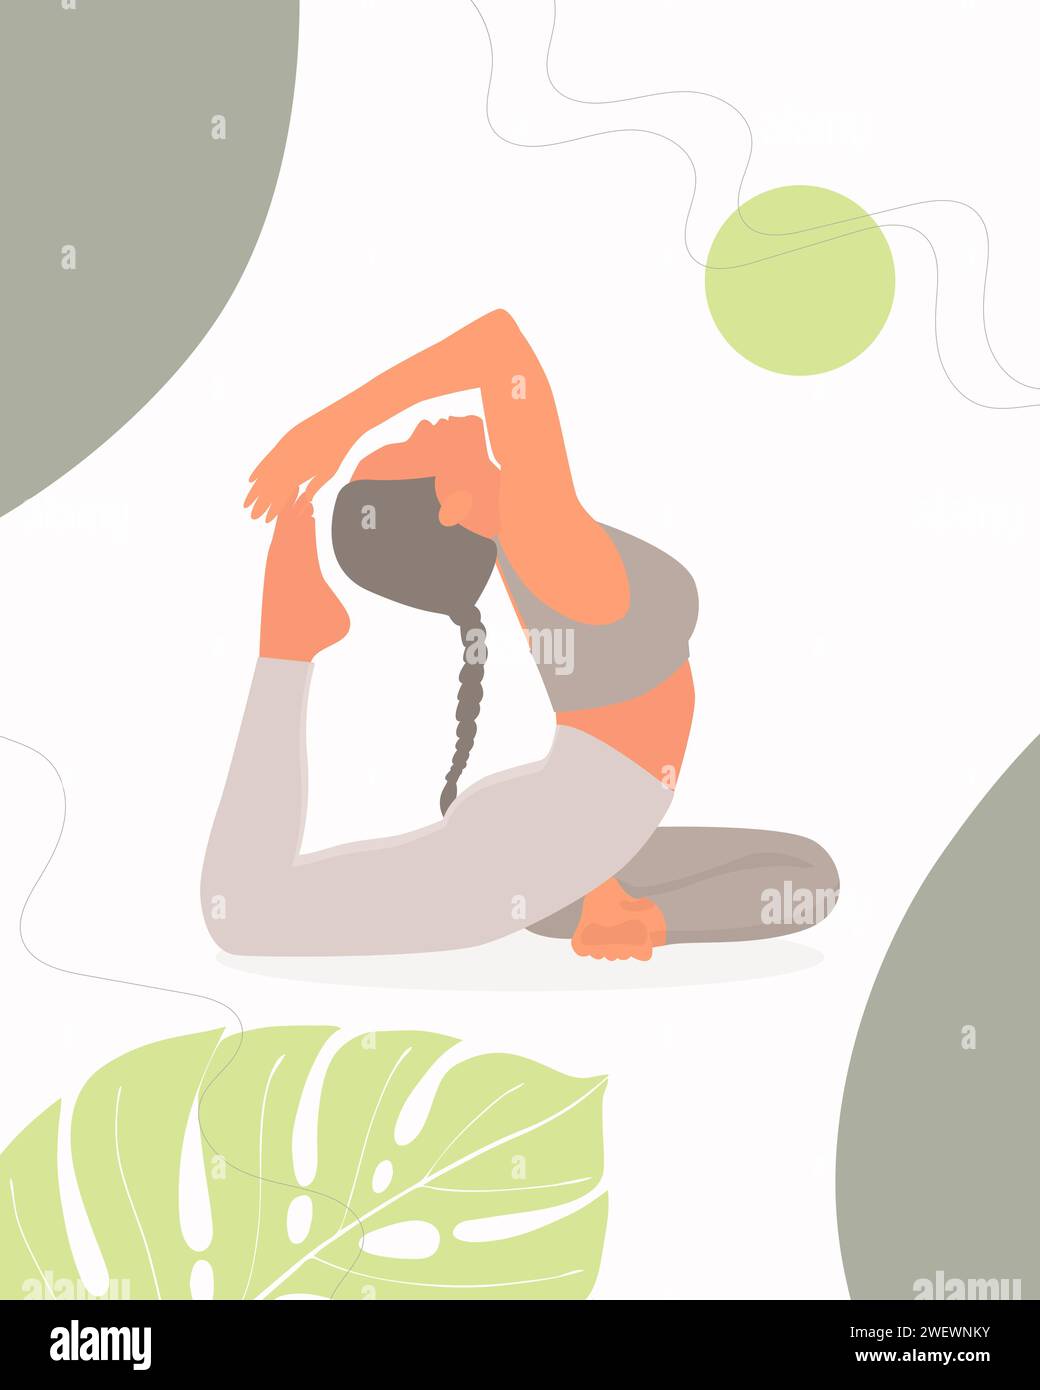 Woman practicing yoga pose in peaceful setting with monstera leaves. Vector illustration Stock Vector